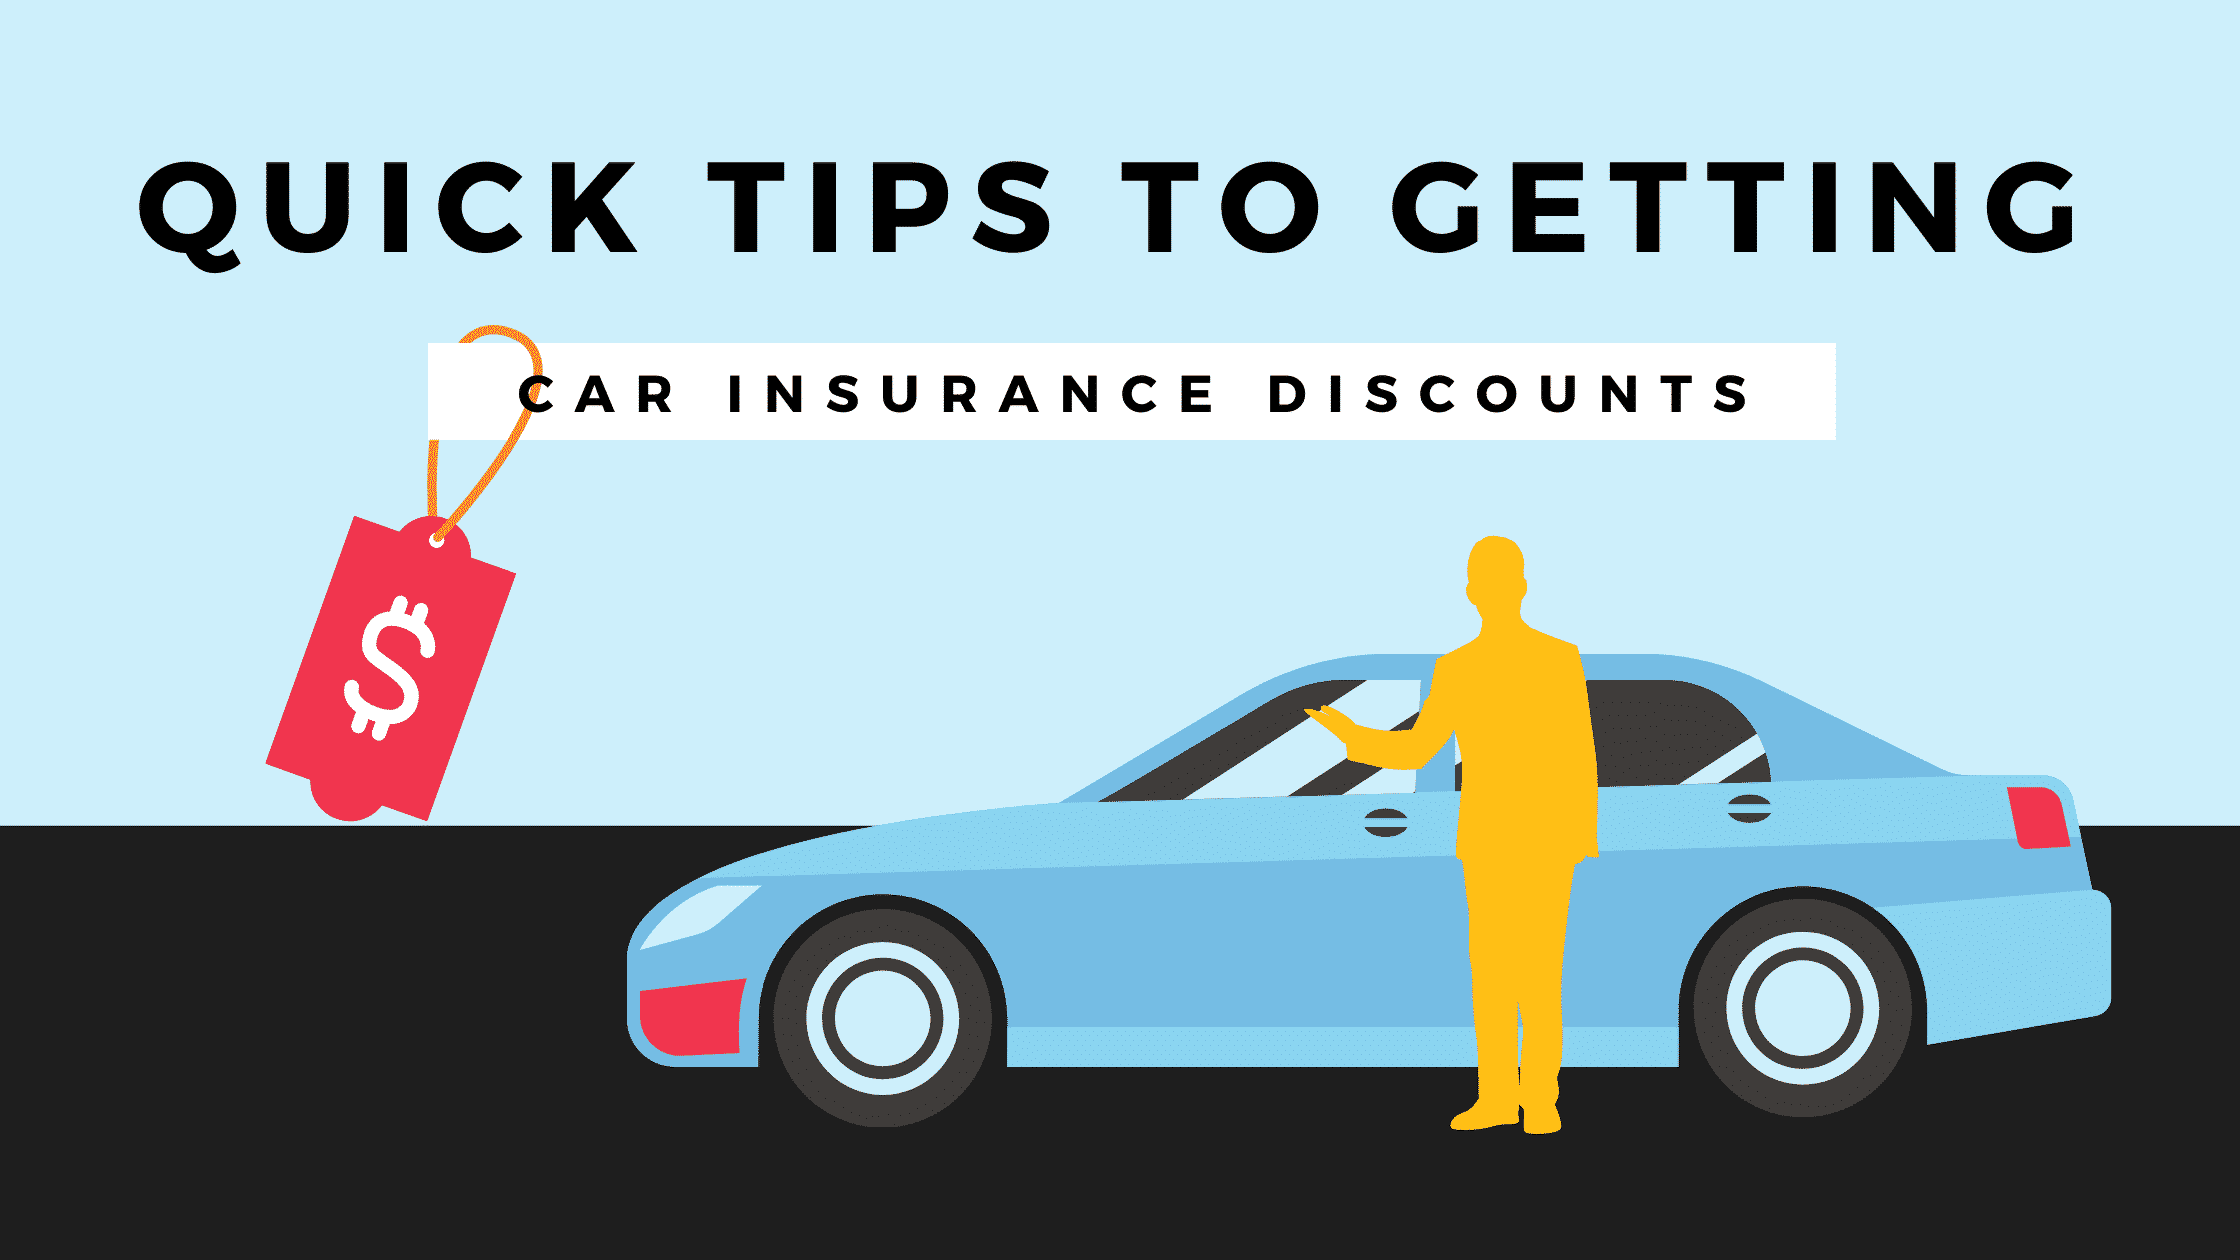 car-insurance-discounts-tips-to-get-discount-settle-insurance